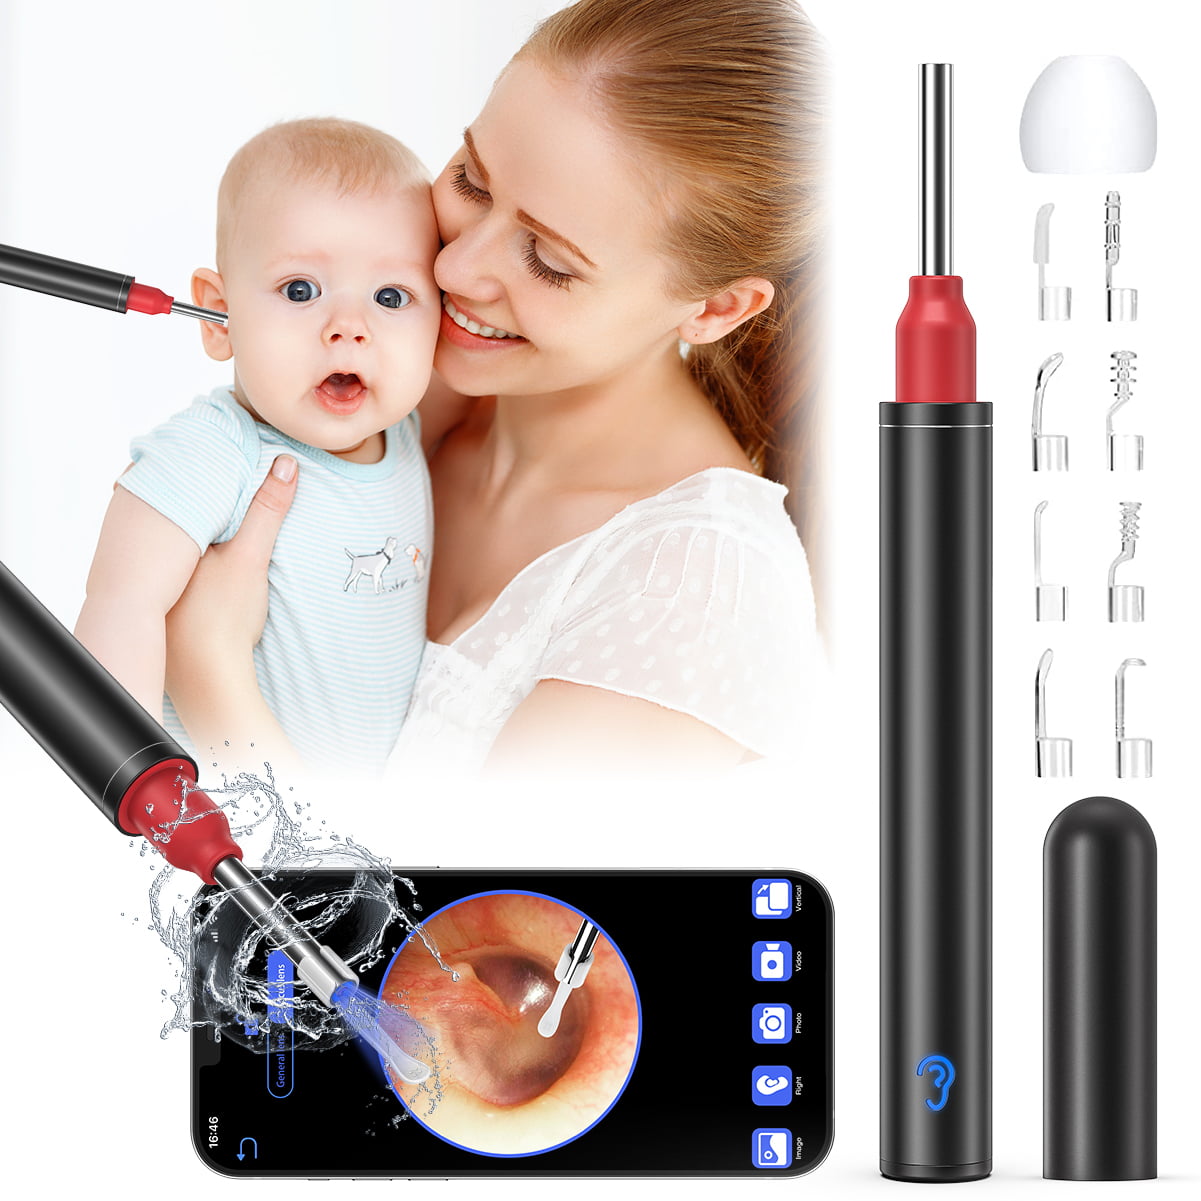 Ear Scope Compatible with iPhone Android iPad for Adults Kids Pets… Waterproof Ear Cleaner Camera with 6 Led Lights Ear Wax Removal Tool Ear Cleaner with 1080P HD Camera 